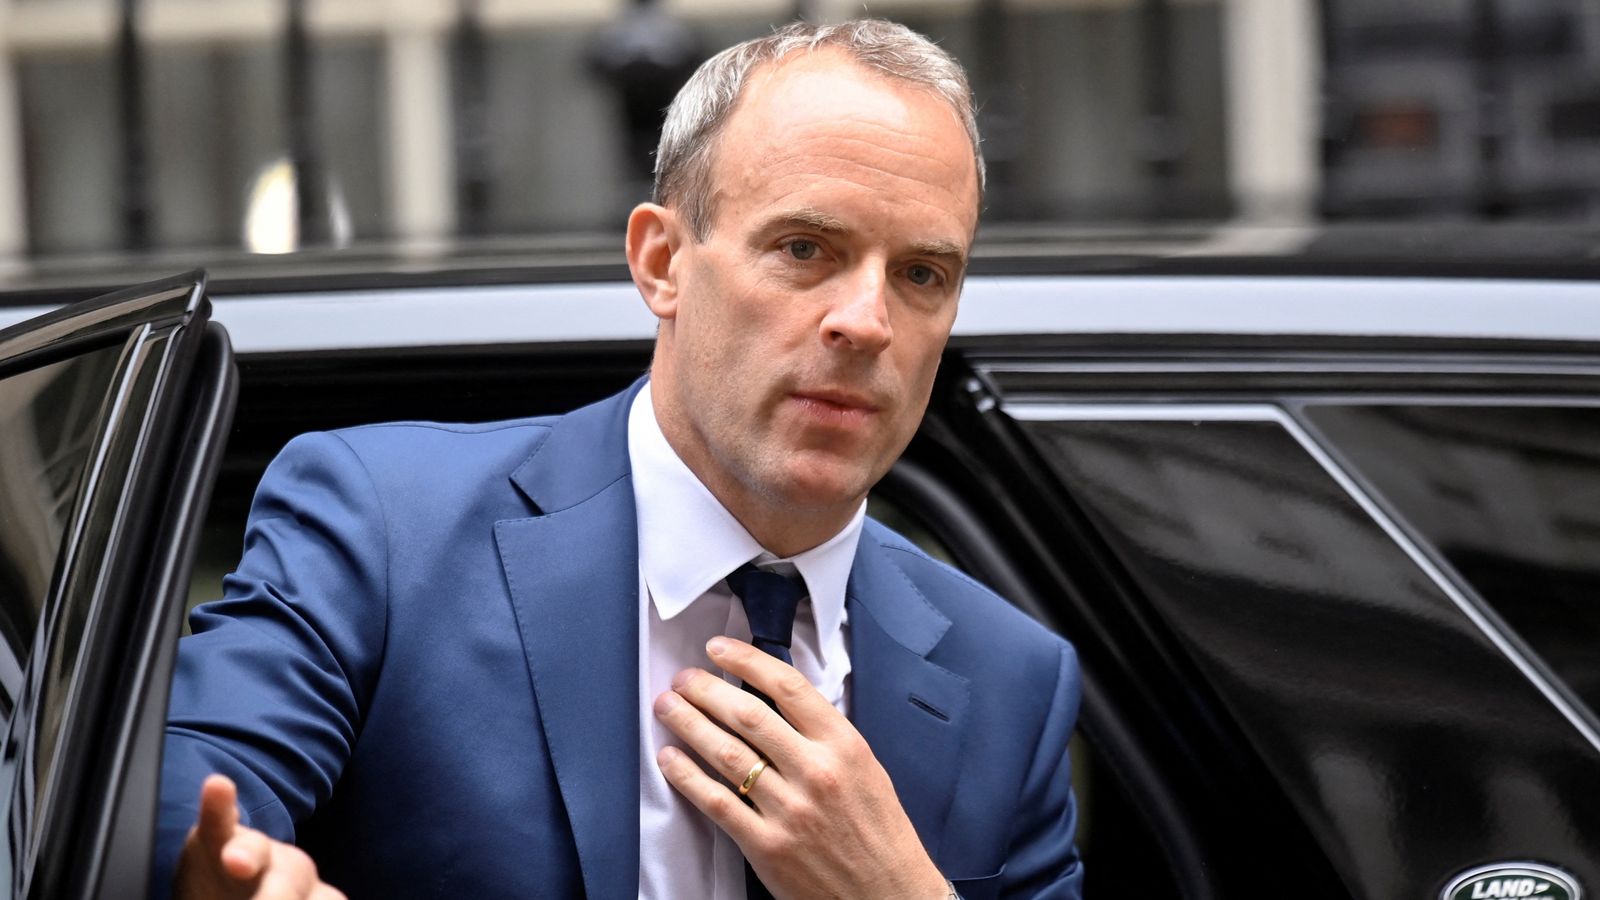 Dominic Raab ‘values’ civil servants, Ministry of Justice insists amid bullying claims |  PoliticsNews